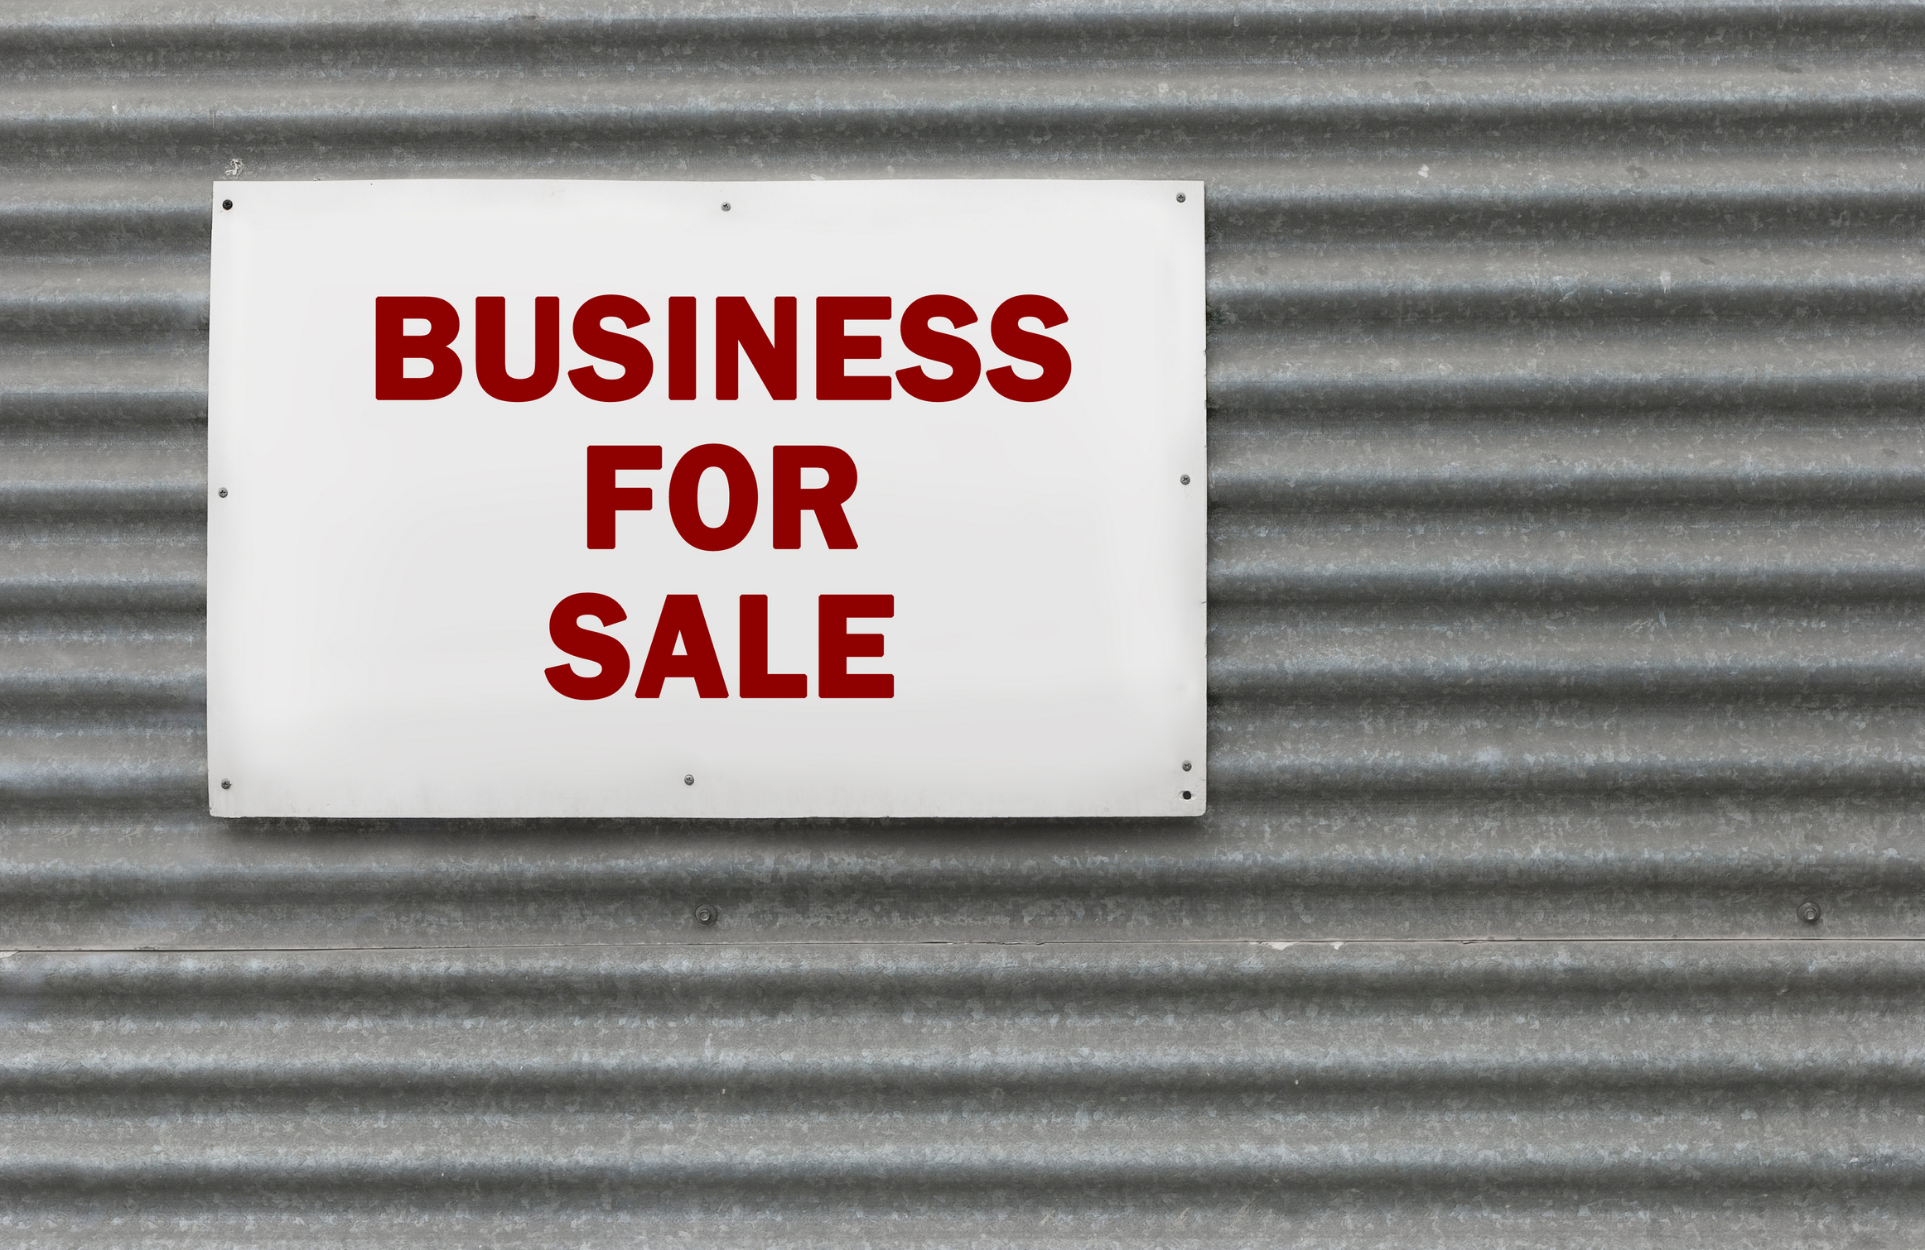 Business announcement for sale on the shop shutters